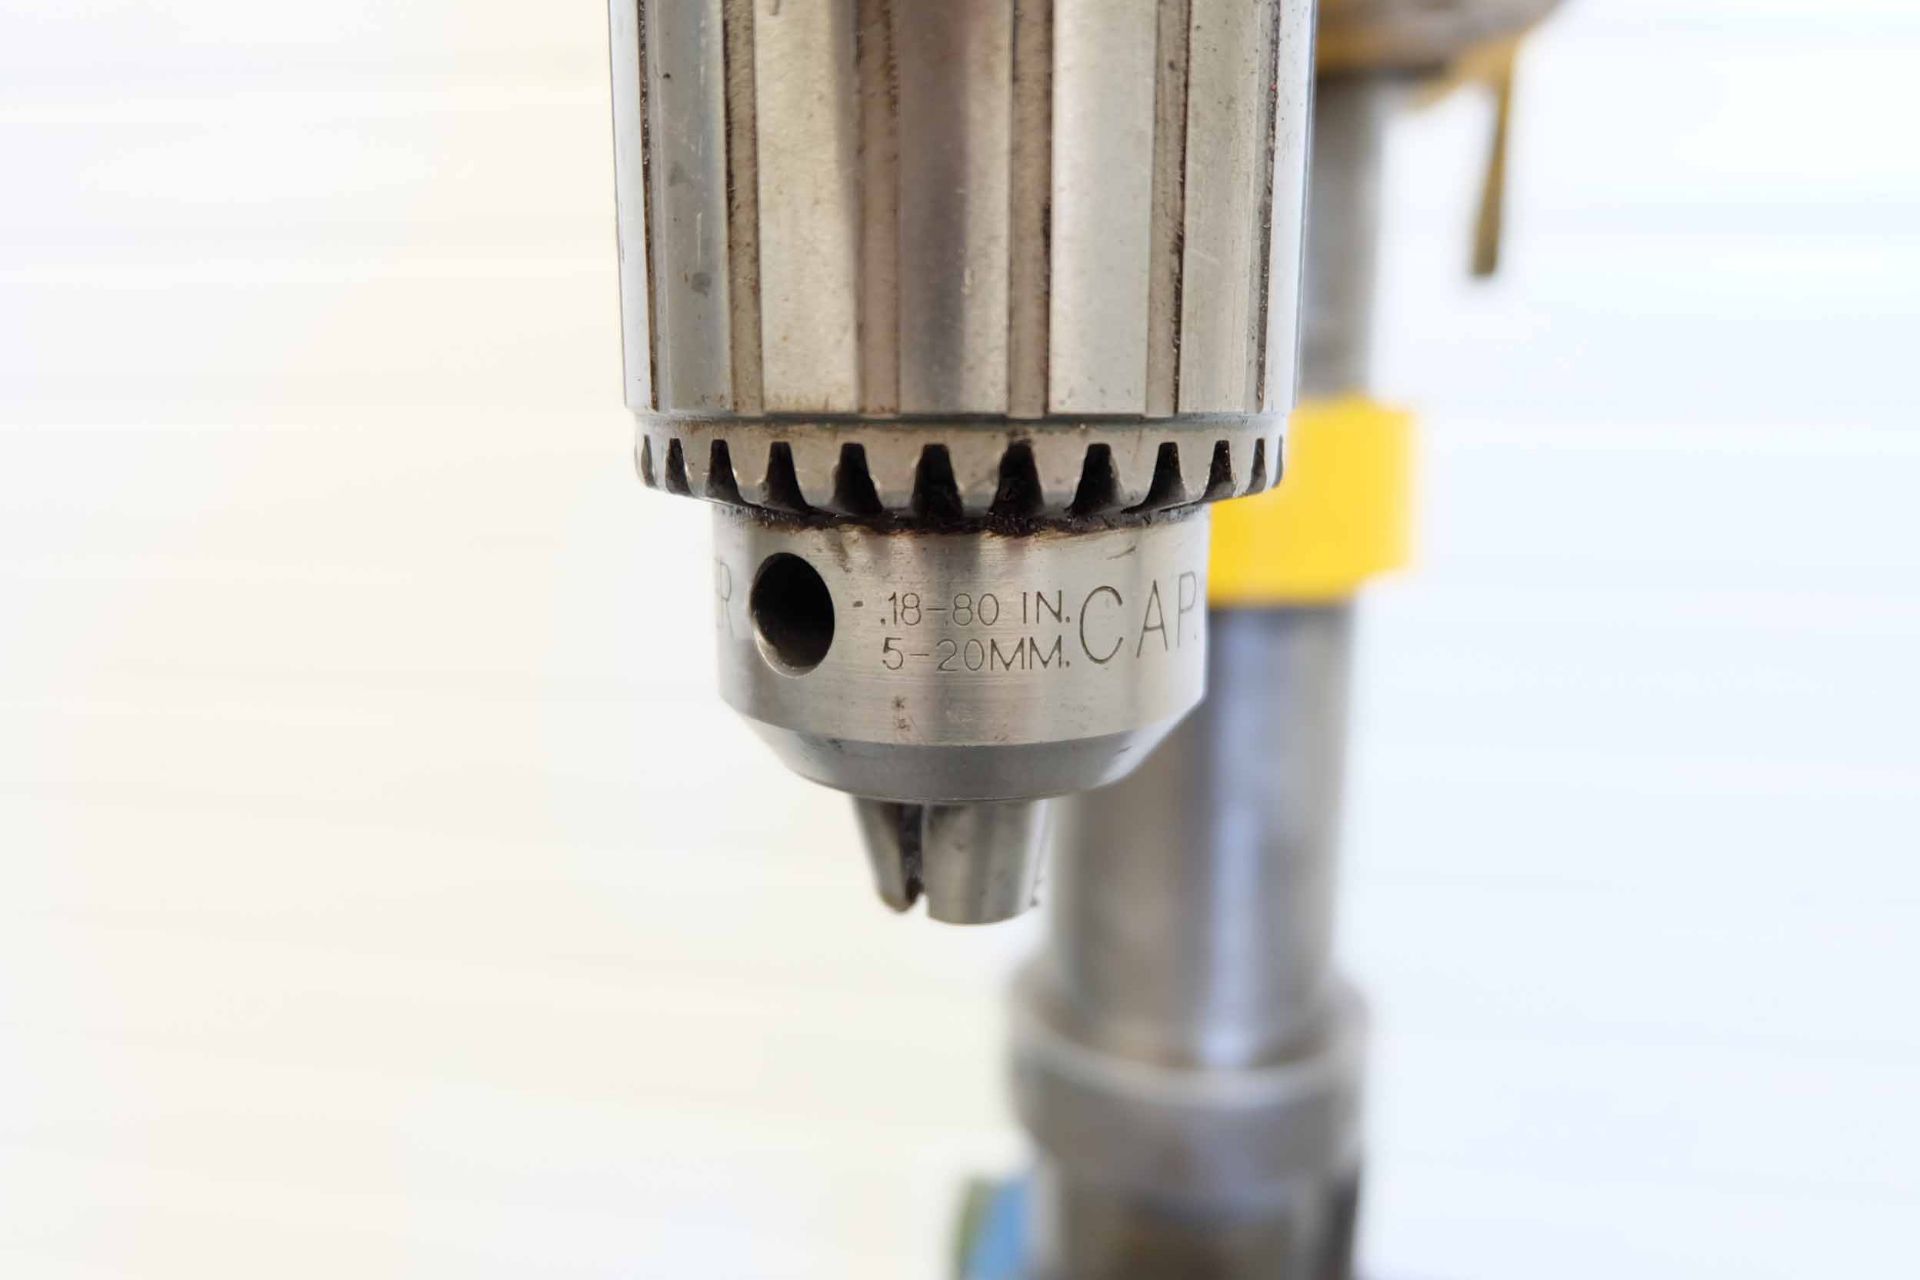 Startrite EFI Pillar Drill. Spindle Taper No.3 Morse. Spindle Speeds 125 - 2800rpm. Drilling Chuck C - Image 9 of 9